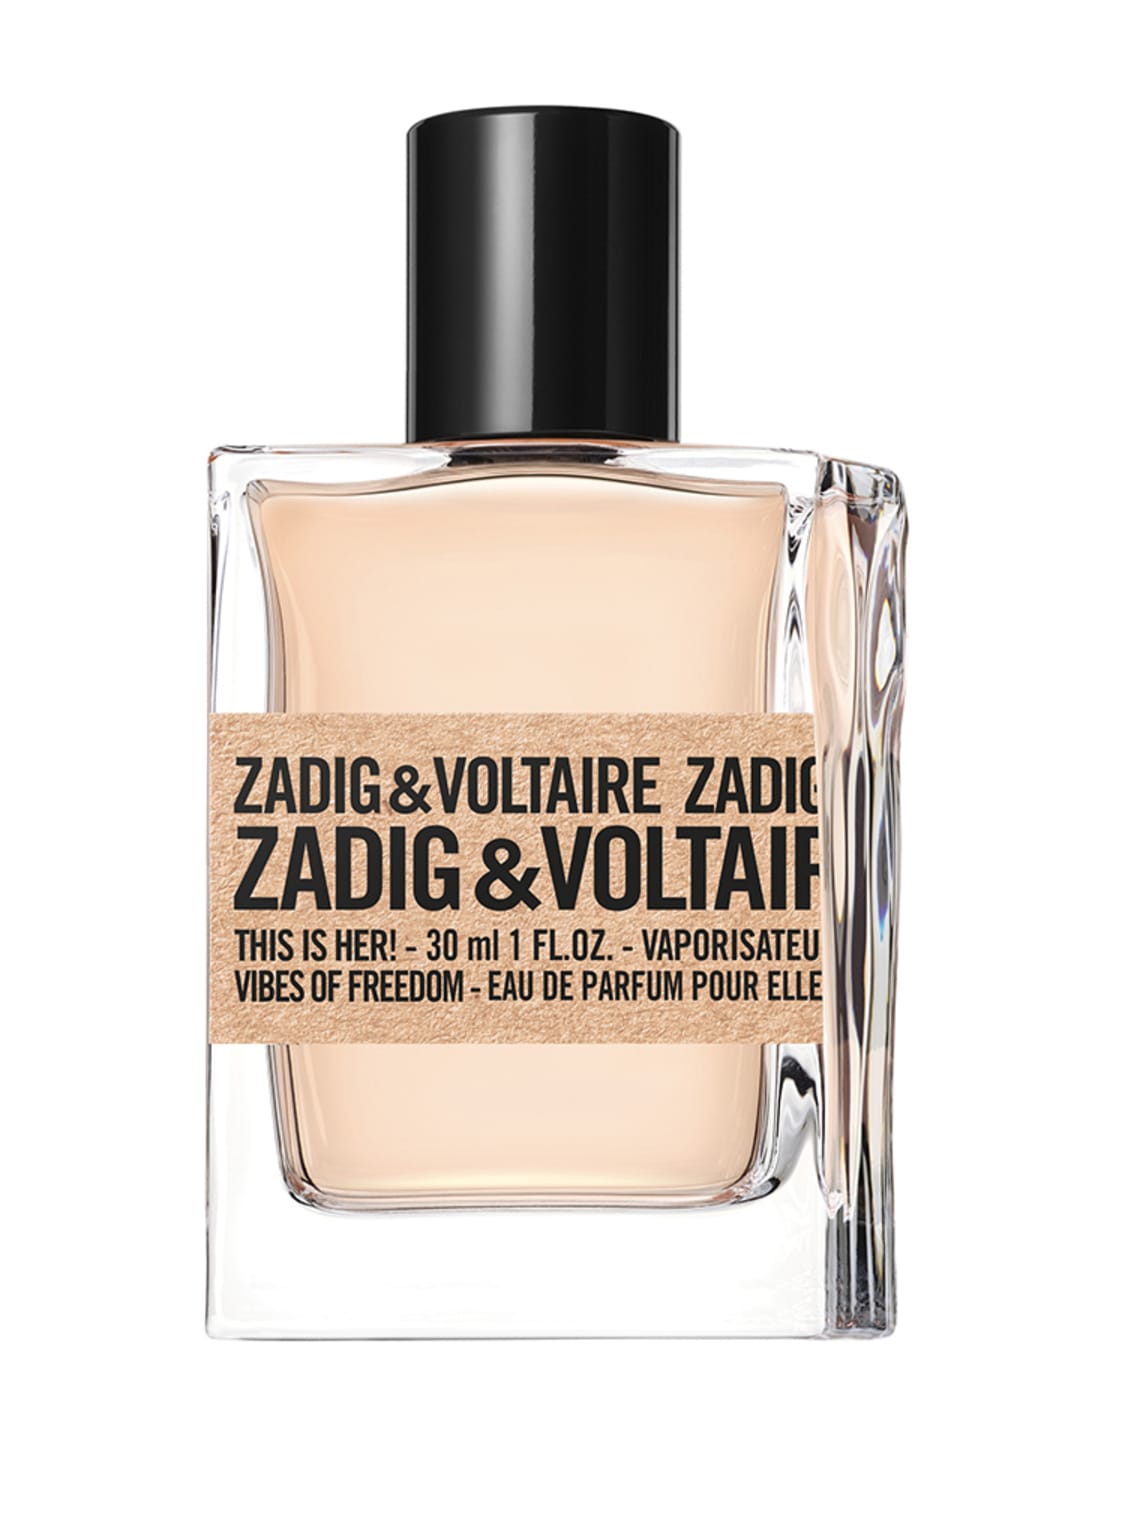 Image of Zadig & Voltaire Fragrances This Is Her! Vibes Of Freedom Eau de Parfum 30 ml